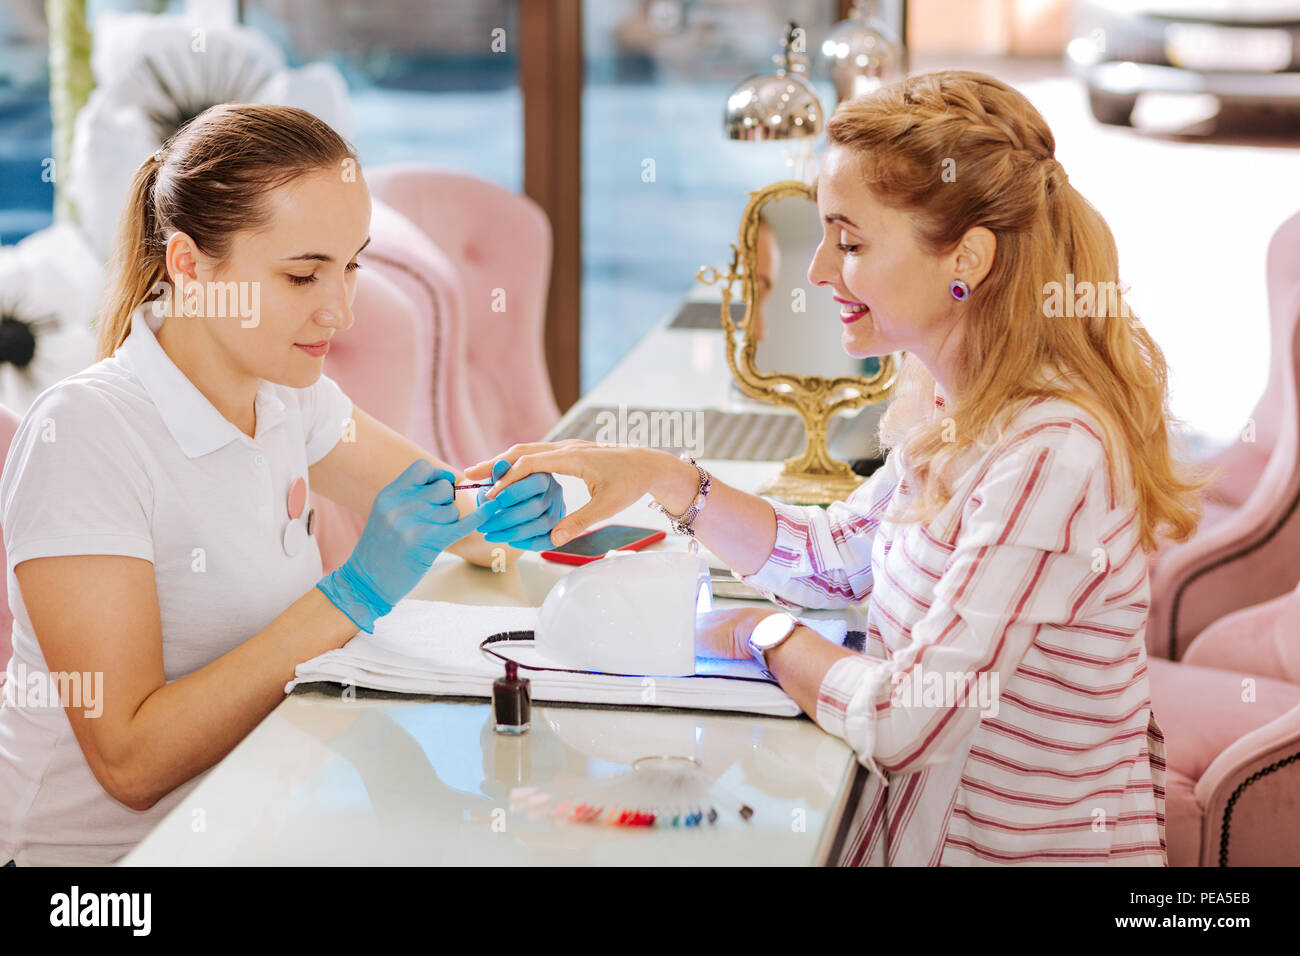 Calm mature woman attending nail bar this time Stock Photo